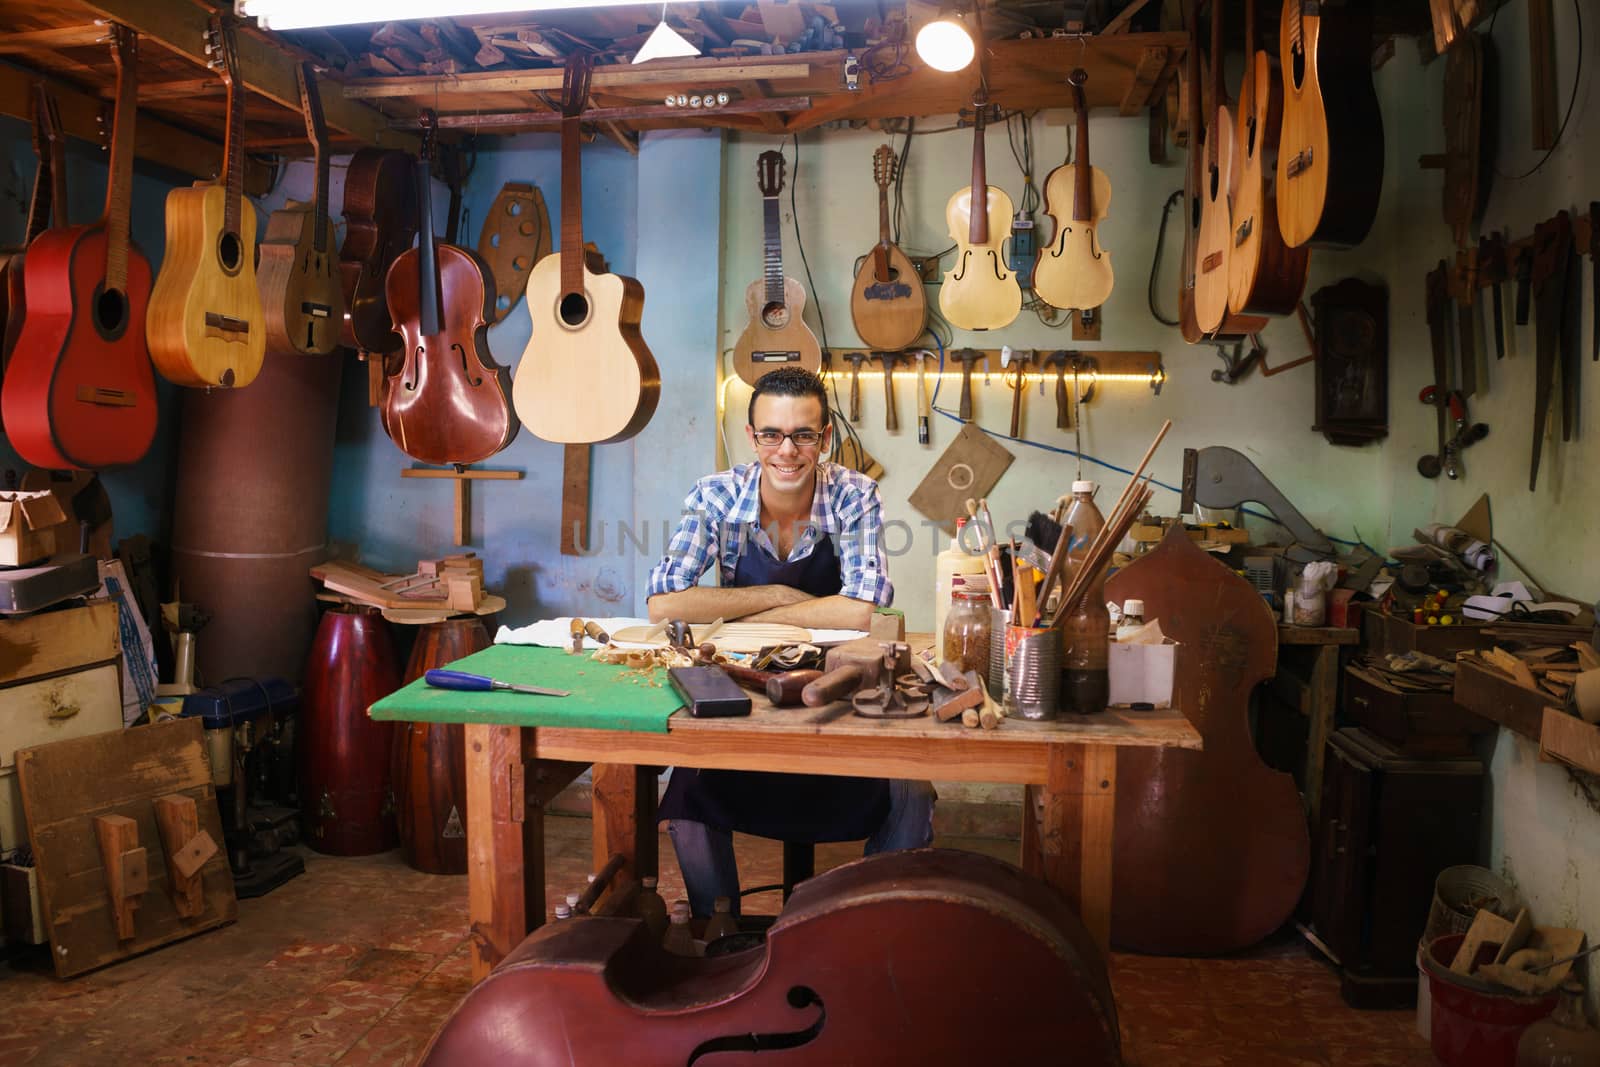 Portrait Of Happy Artisan Lute Maker In Guitar Shop Smiling At C by diego_cervo